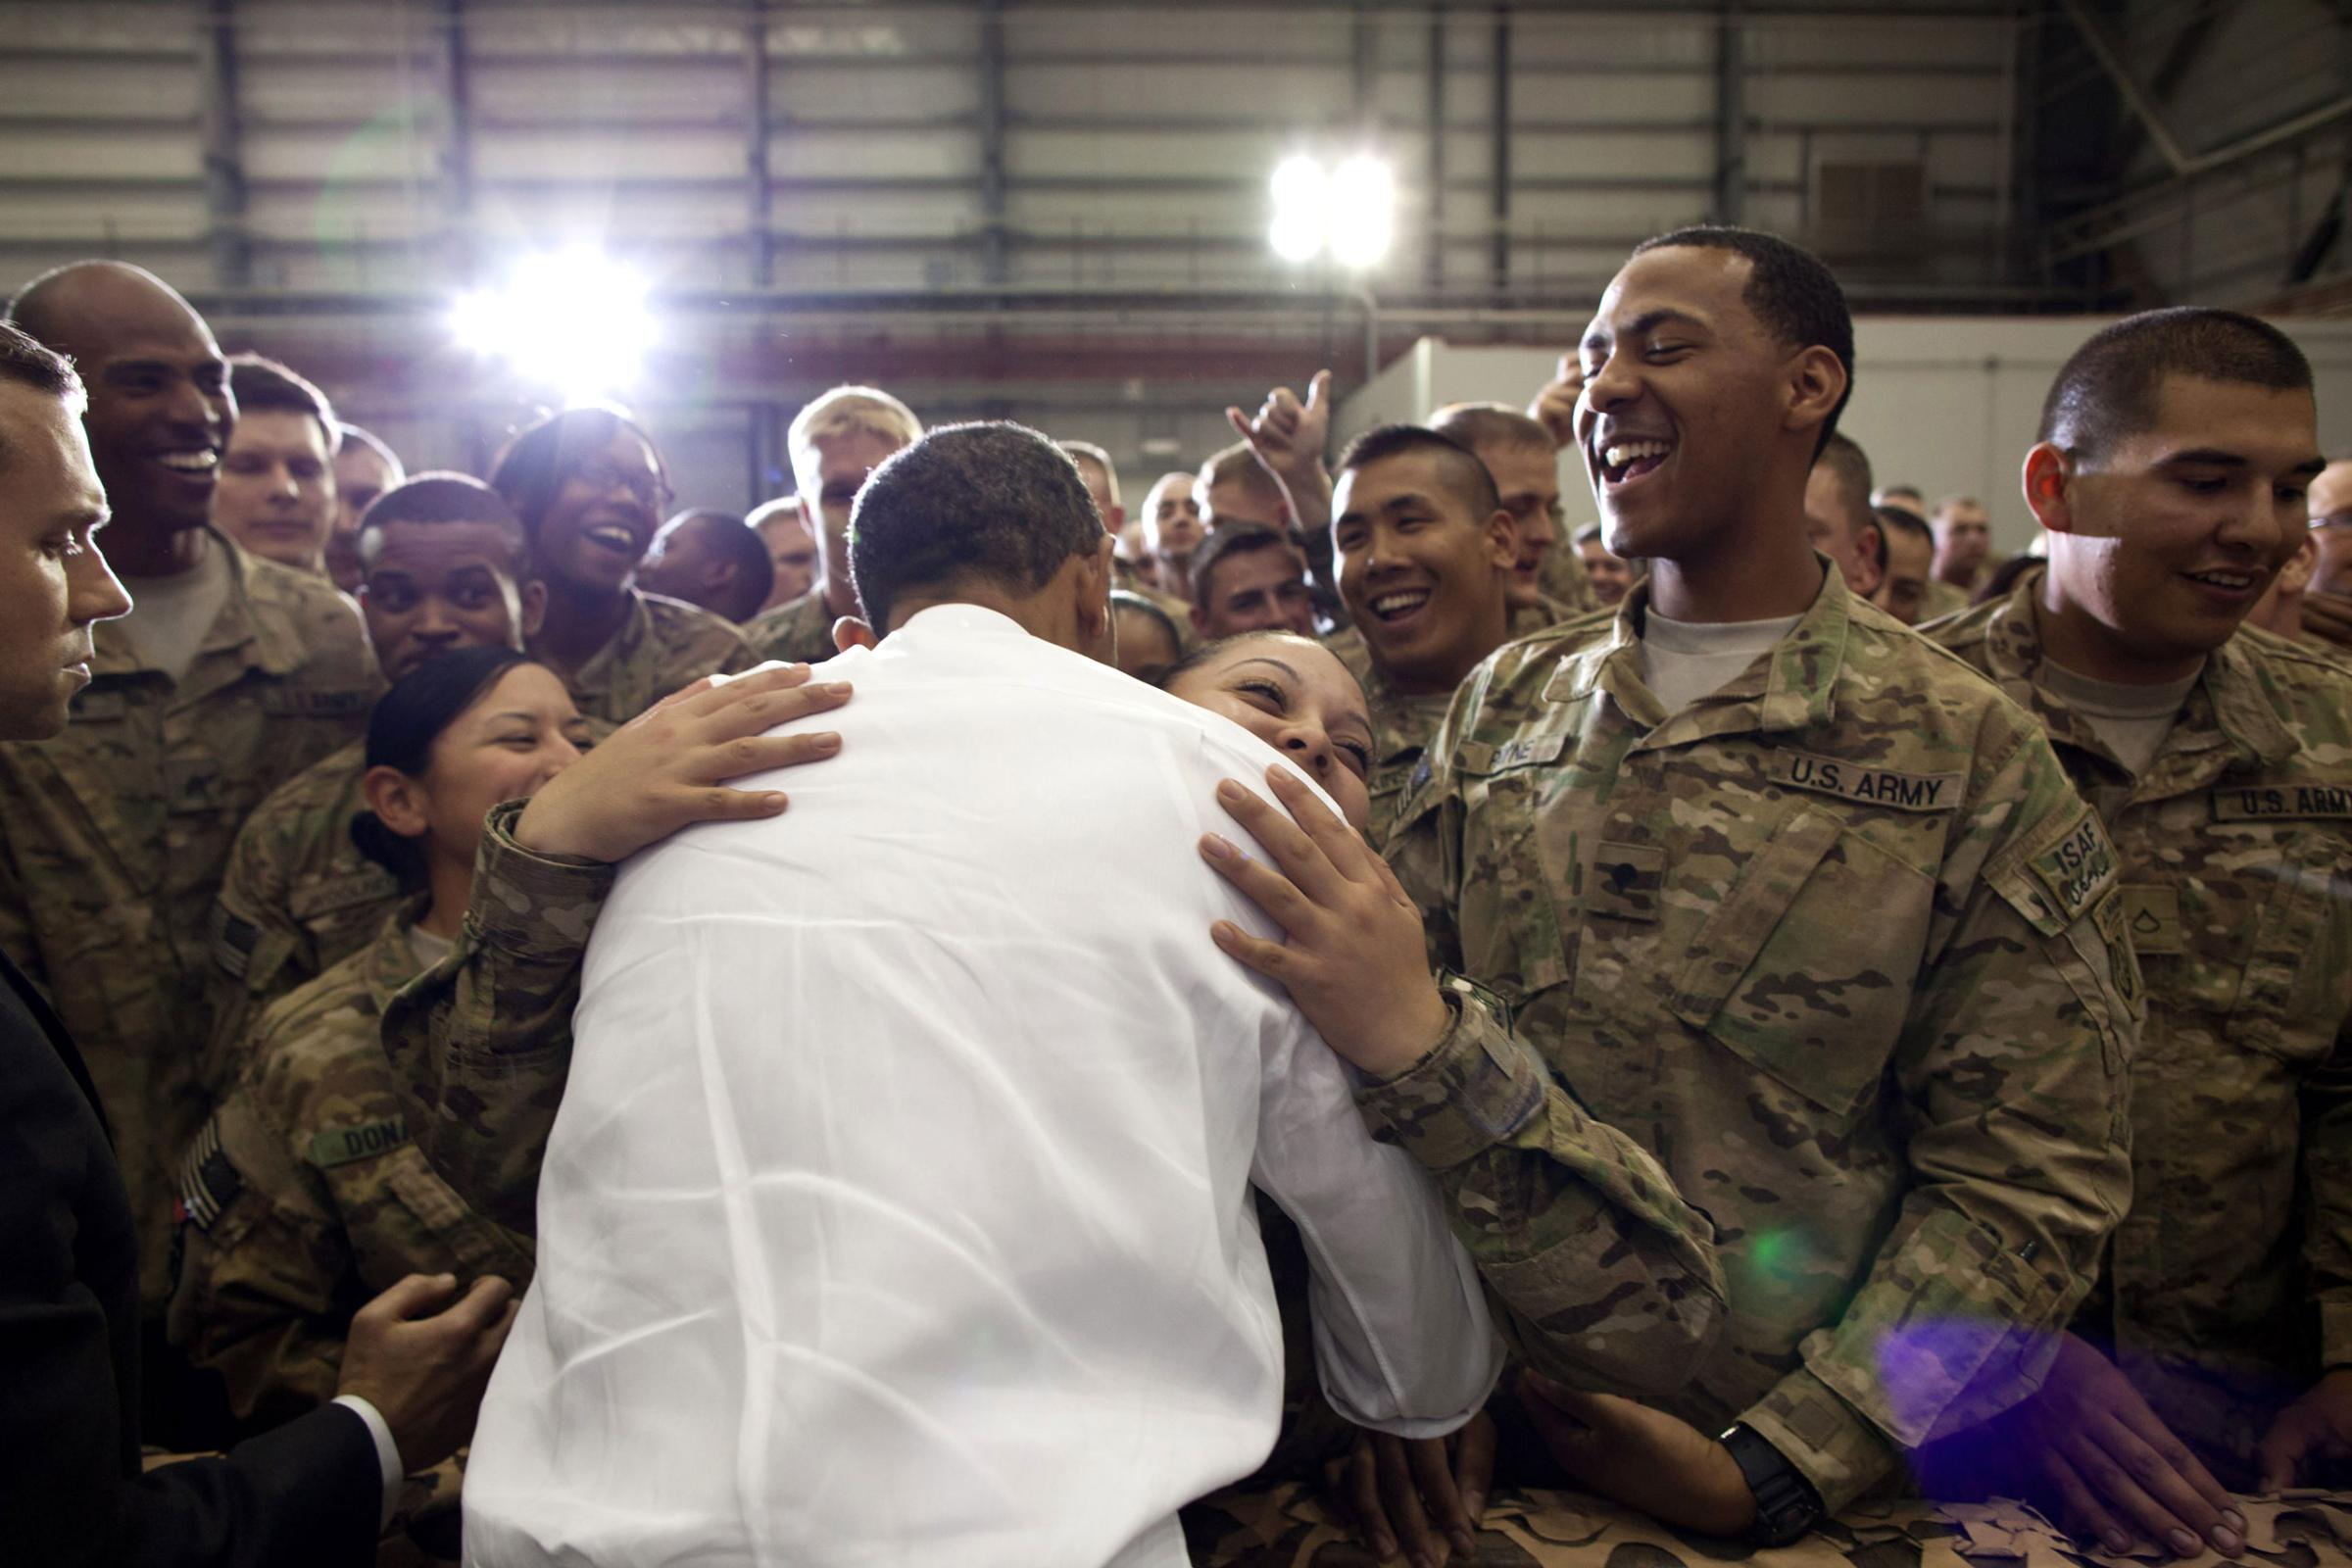 Pete Souza—The White House President Obama greets U.S. troops following his remarks during an unannounced trip to Bagram Air Field, Afghanistan, May 1, 2012. The President made three trips around the ropeline to try and shake every hand.